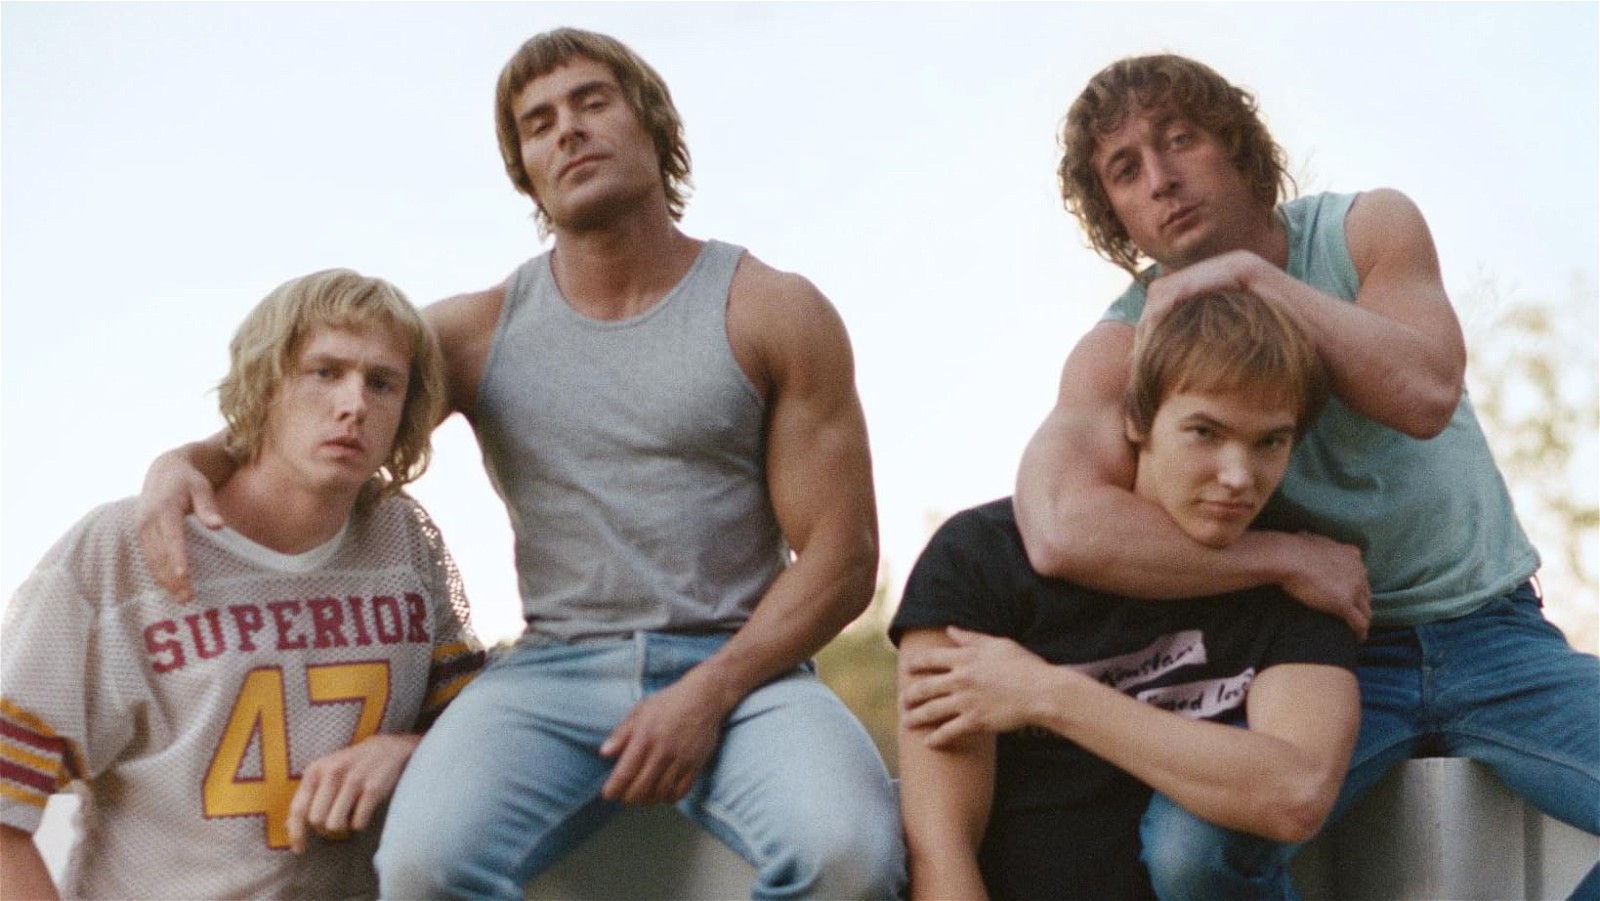 Zac Efron with The Iron Claw co-stars Harris Dickinson, Stanley Simons, and Jeremy Allen White